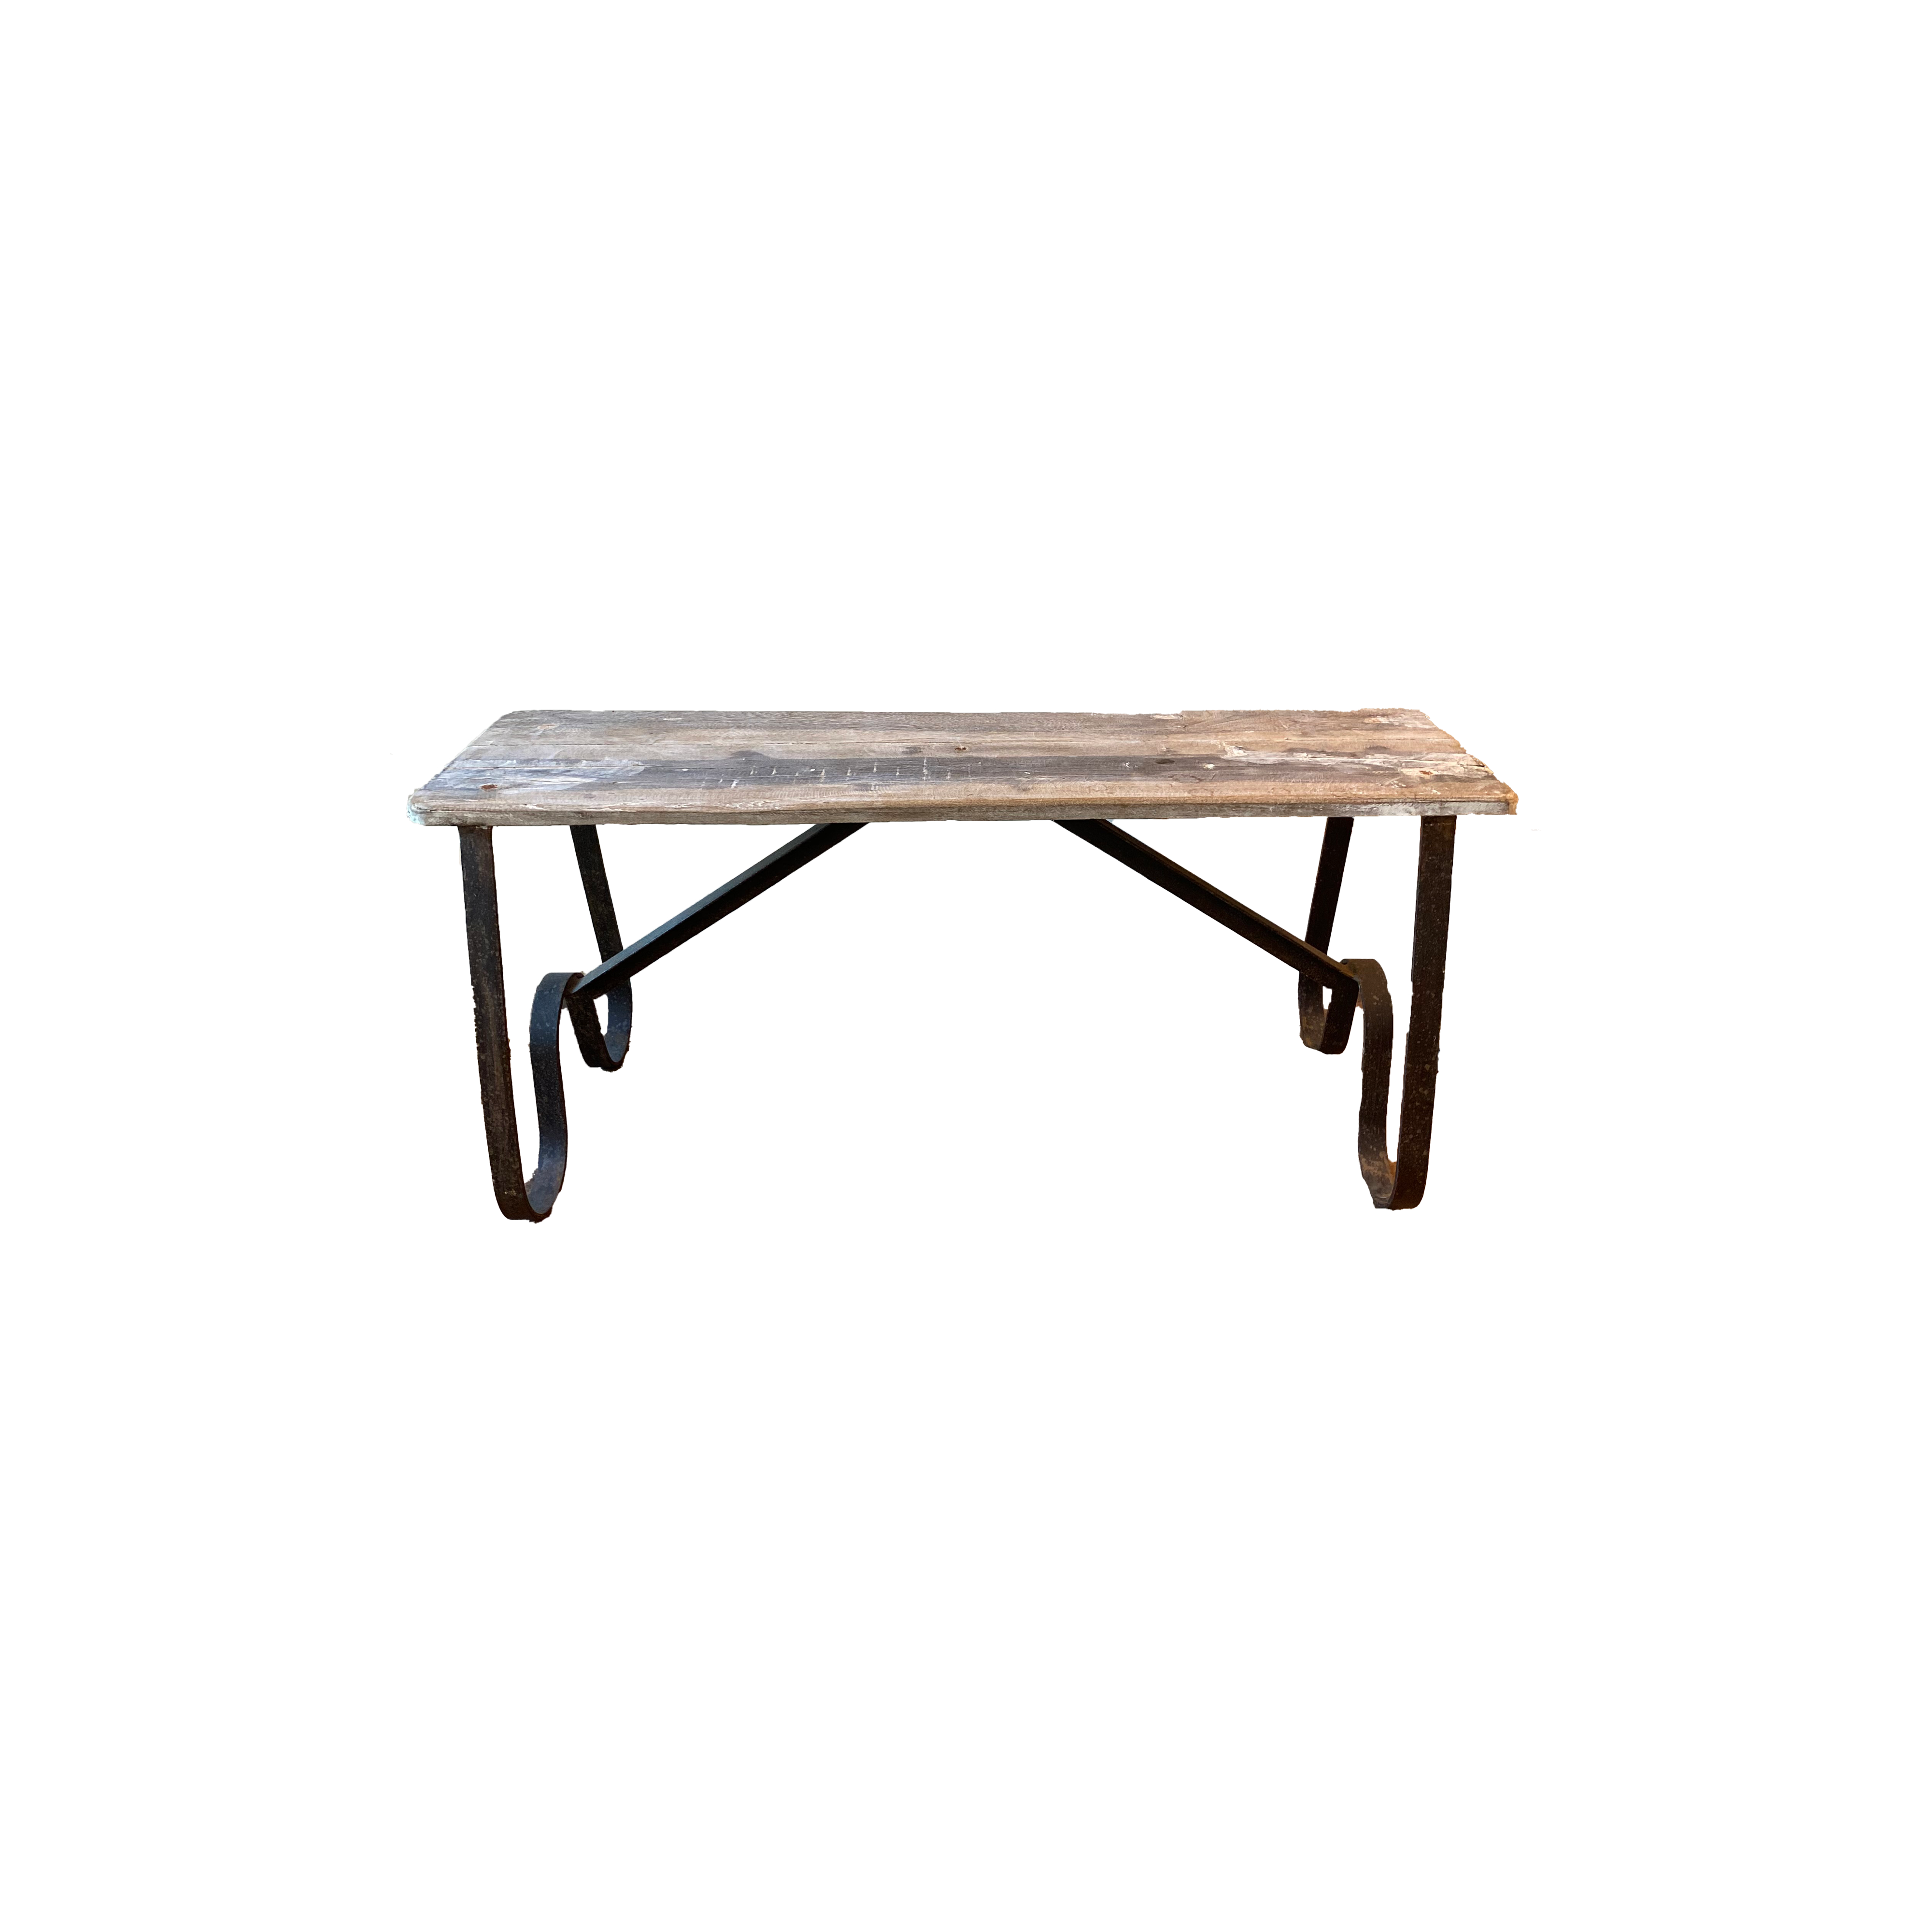 Rustic Wrought Iron & Wood Bench